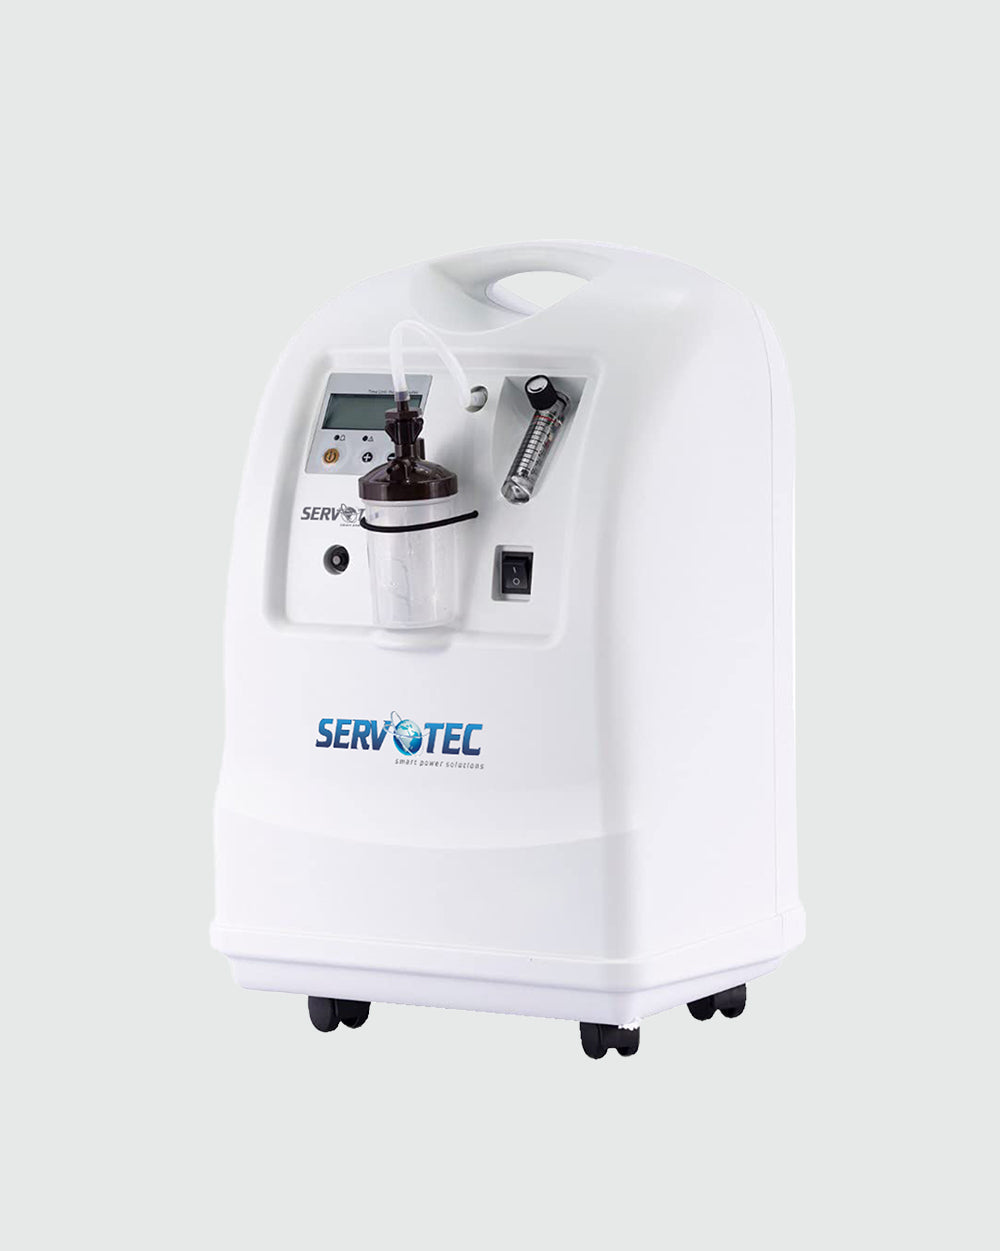 Servotech 5 Litre Medical-Grade Oxygen Concentrator | Suitable For Hospital and Domestic Use | Up to 95% Purity | portable for home patient